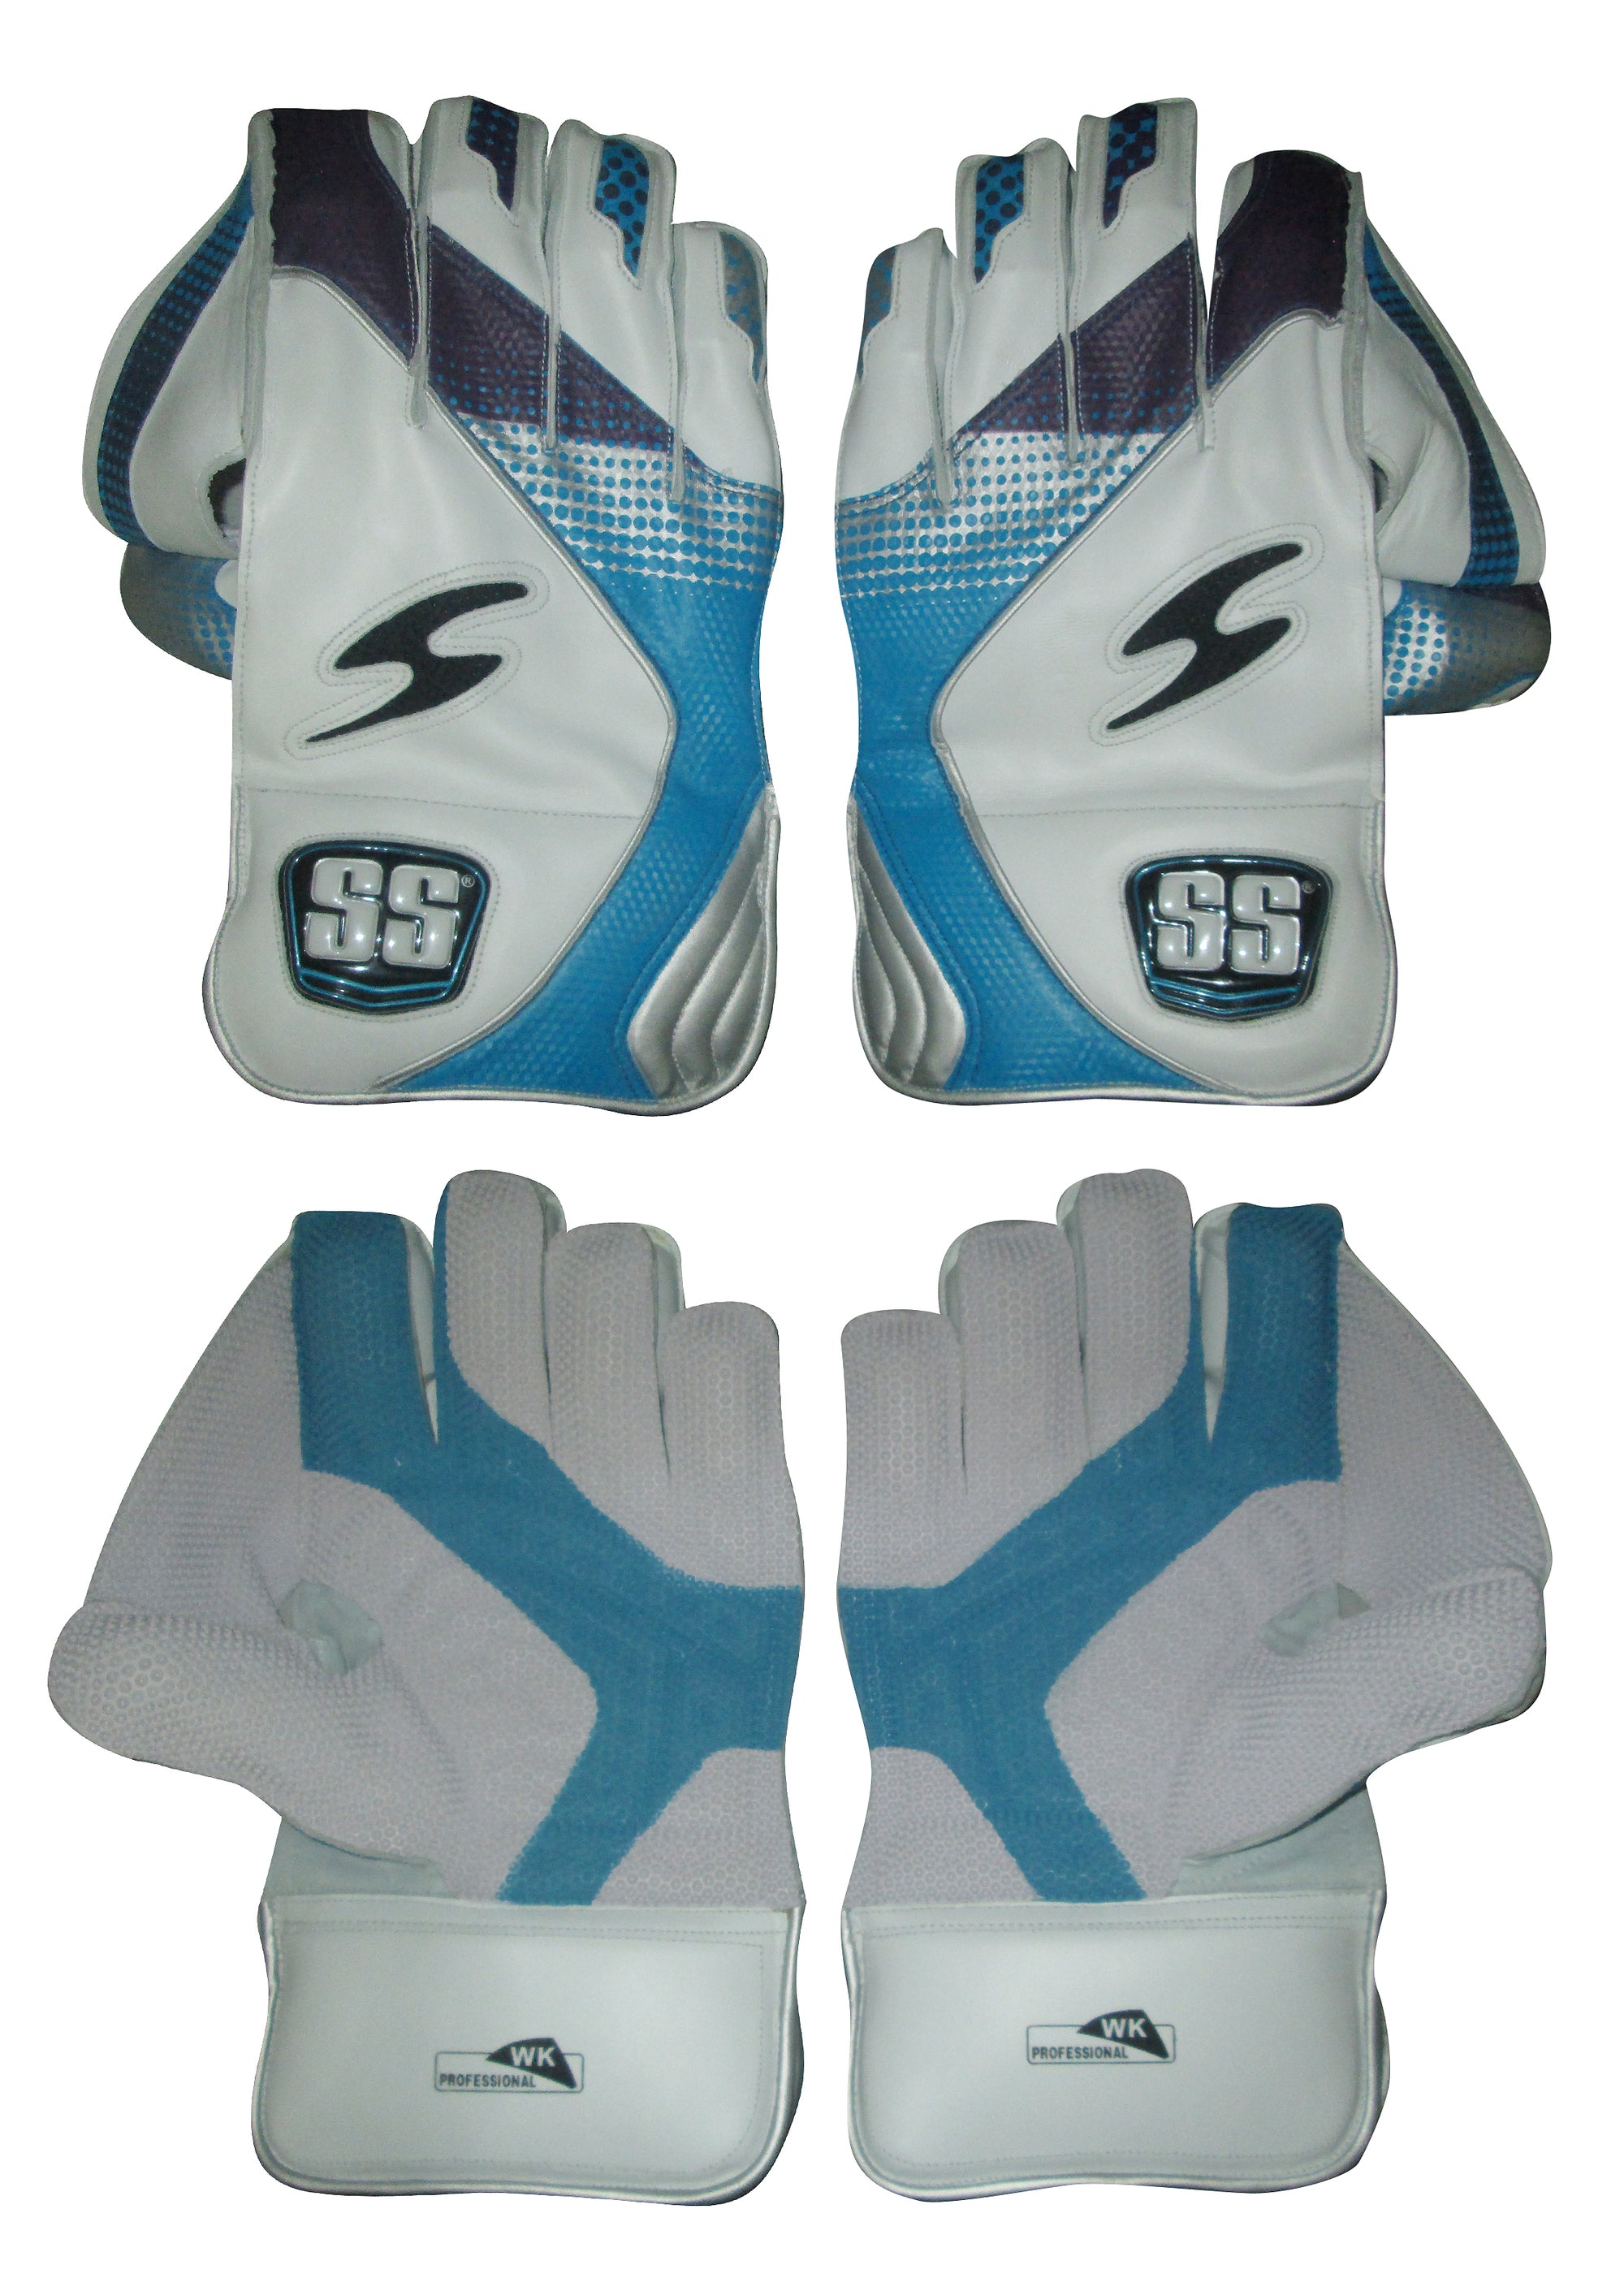 SS PROFESSIONAL WICKET KEEPING GLOVES